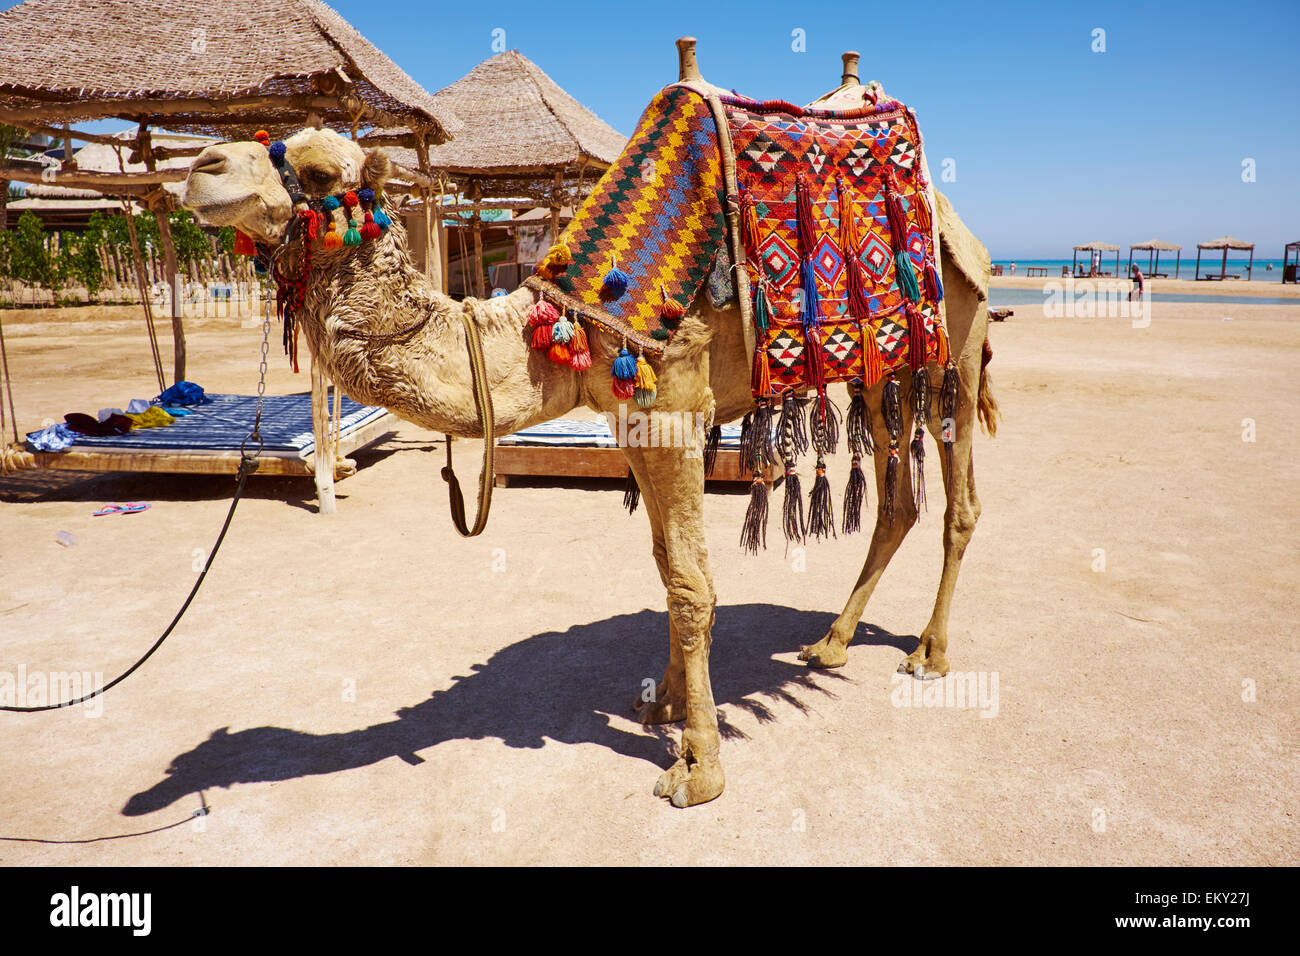 Camel Used For Tourists To Ride On Straits Of Tiran Red Sea Sharm El Sheikh Egypt Stock Photo